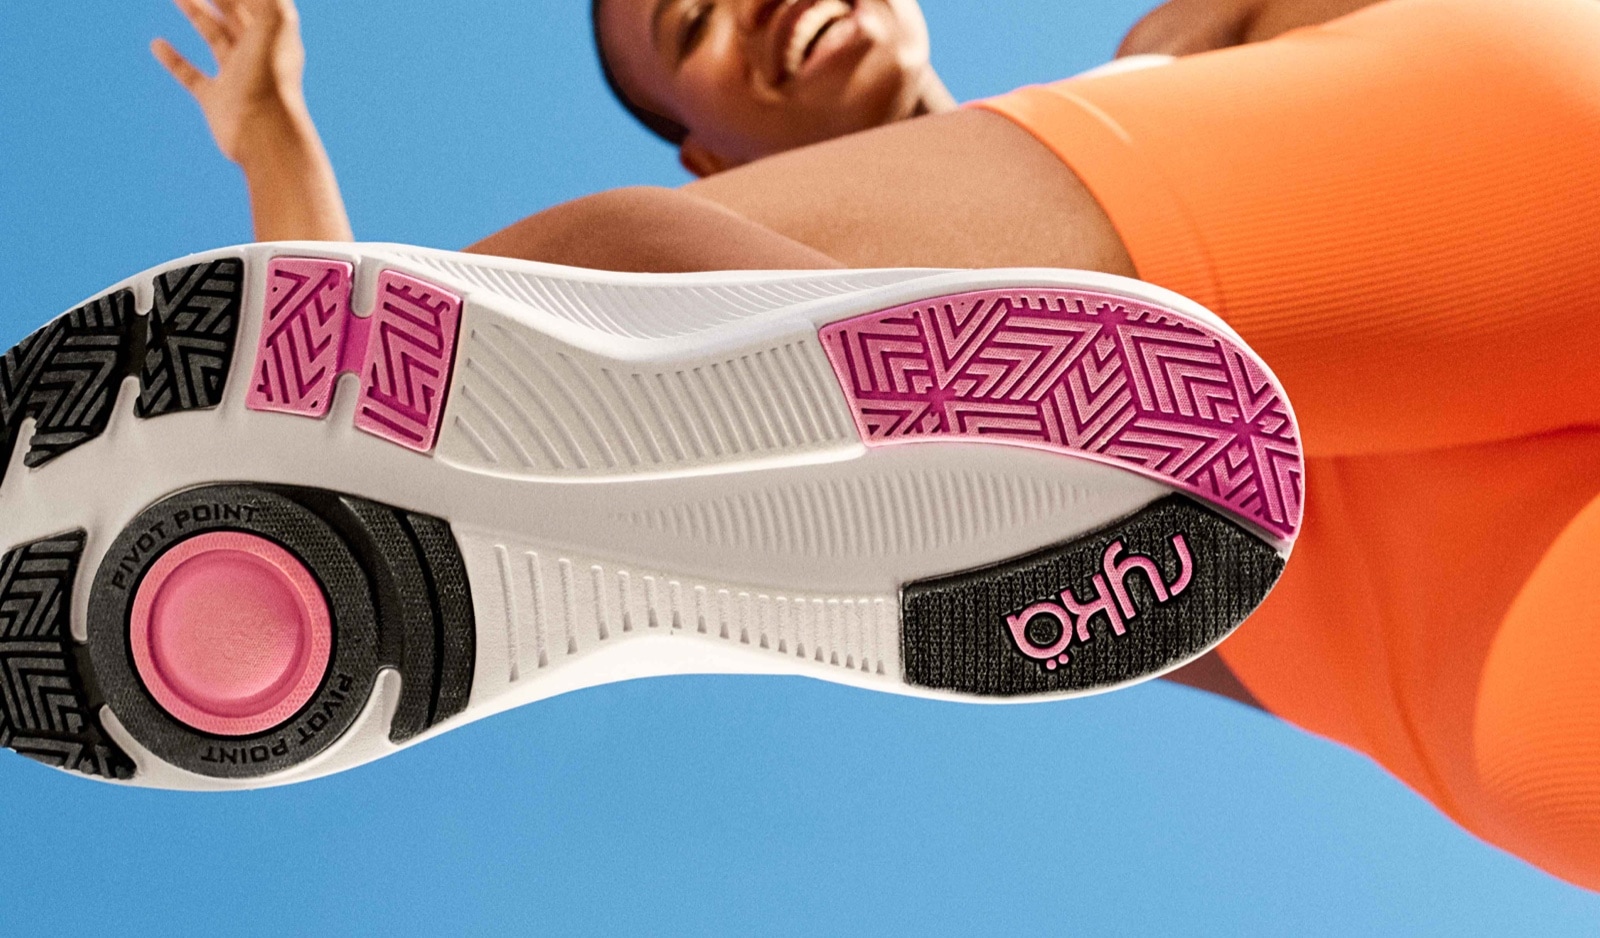 softer foot cushioning for all day comfort